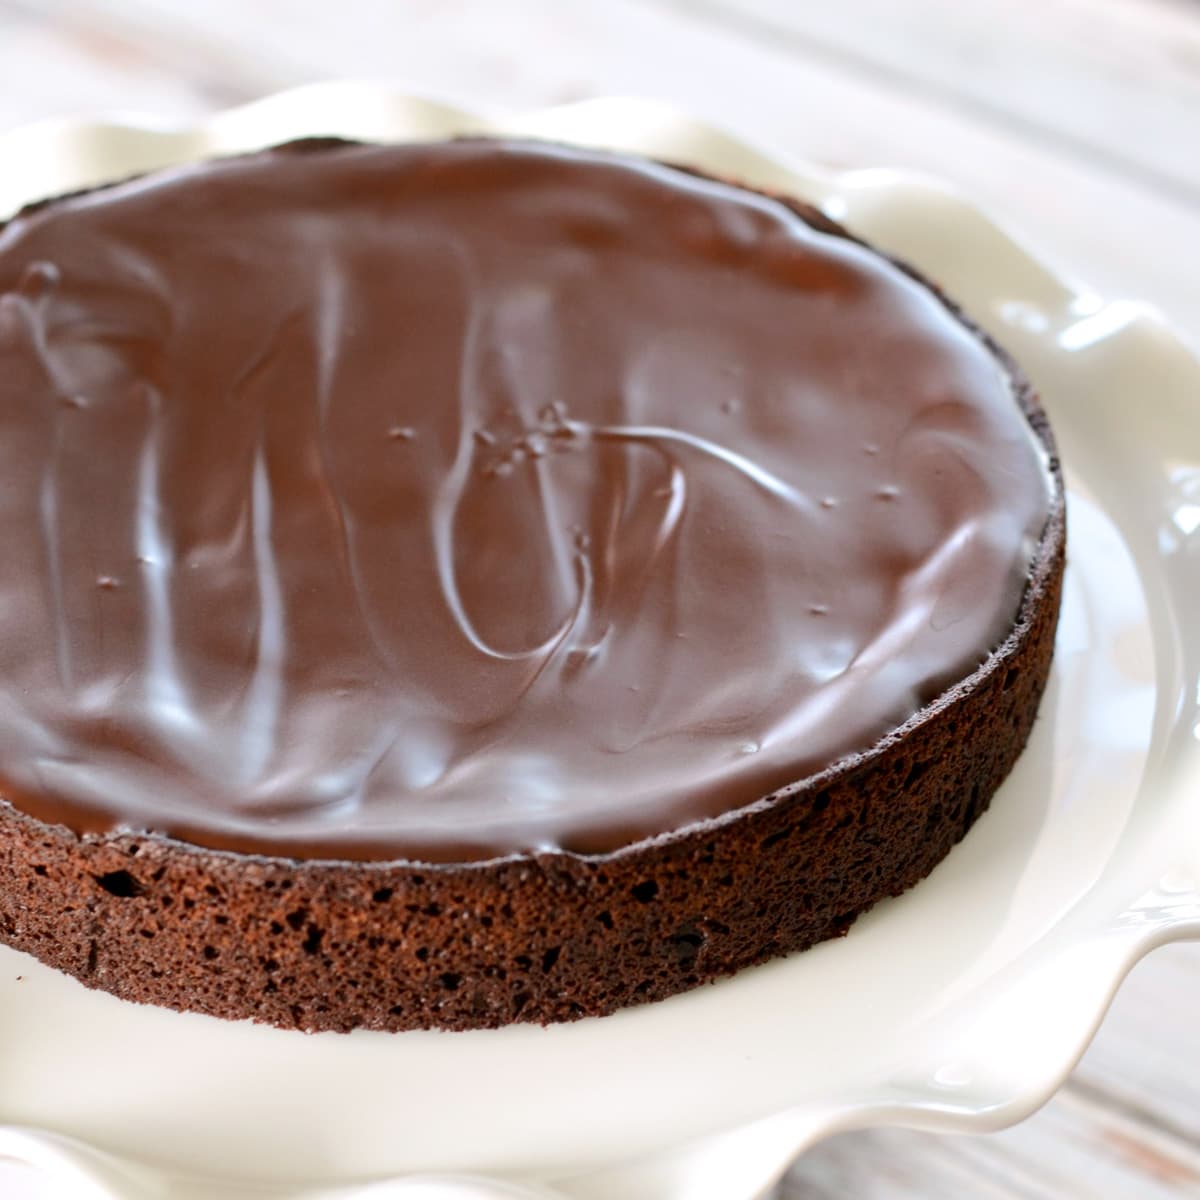 Chocolate cake topped with chocolate icing on a white plate.